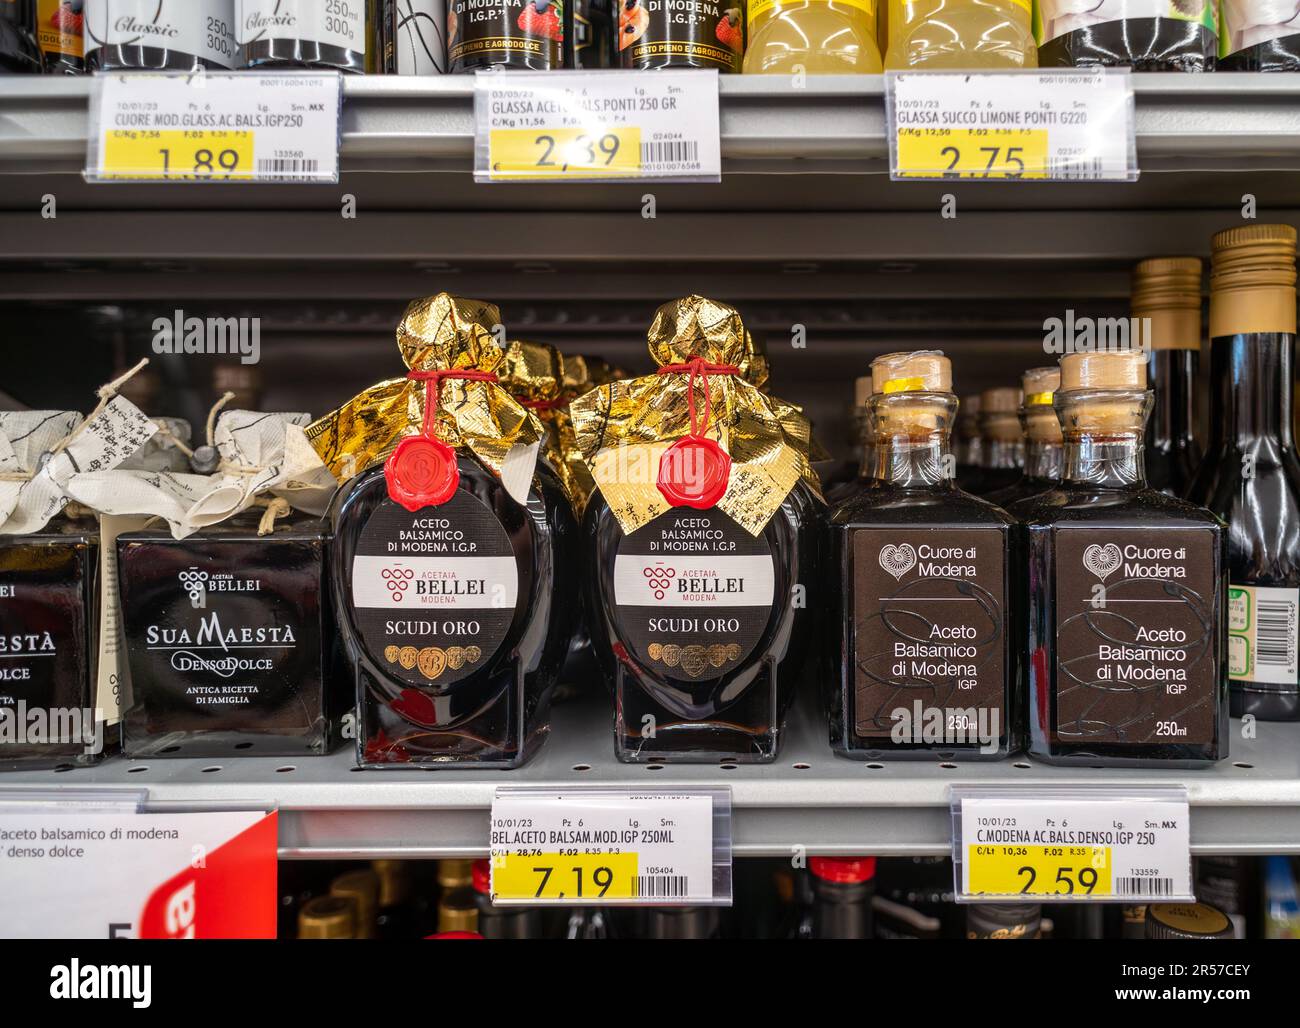 Italy - May 31, 2023: Balsamic Vinegar of Modena I.G.P. in glass ampoules packaged for sale in Italian supermarket shelves. tex: PGI protected geograp Stock Photo